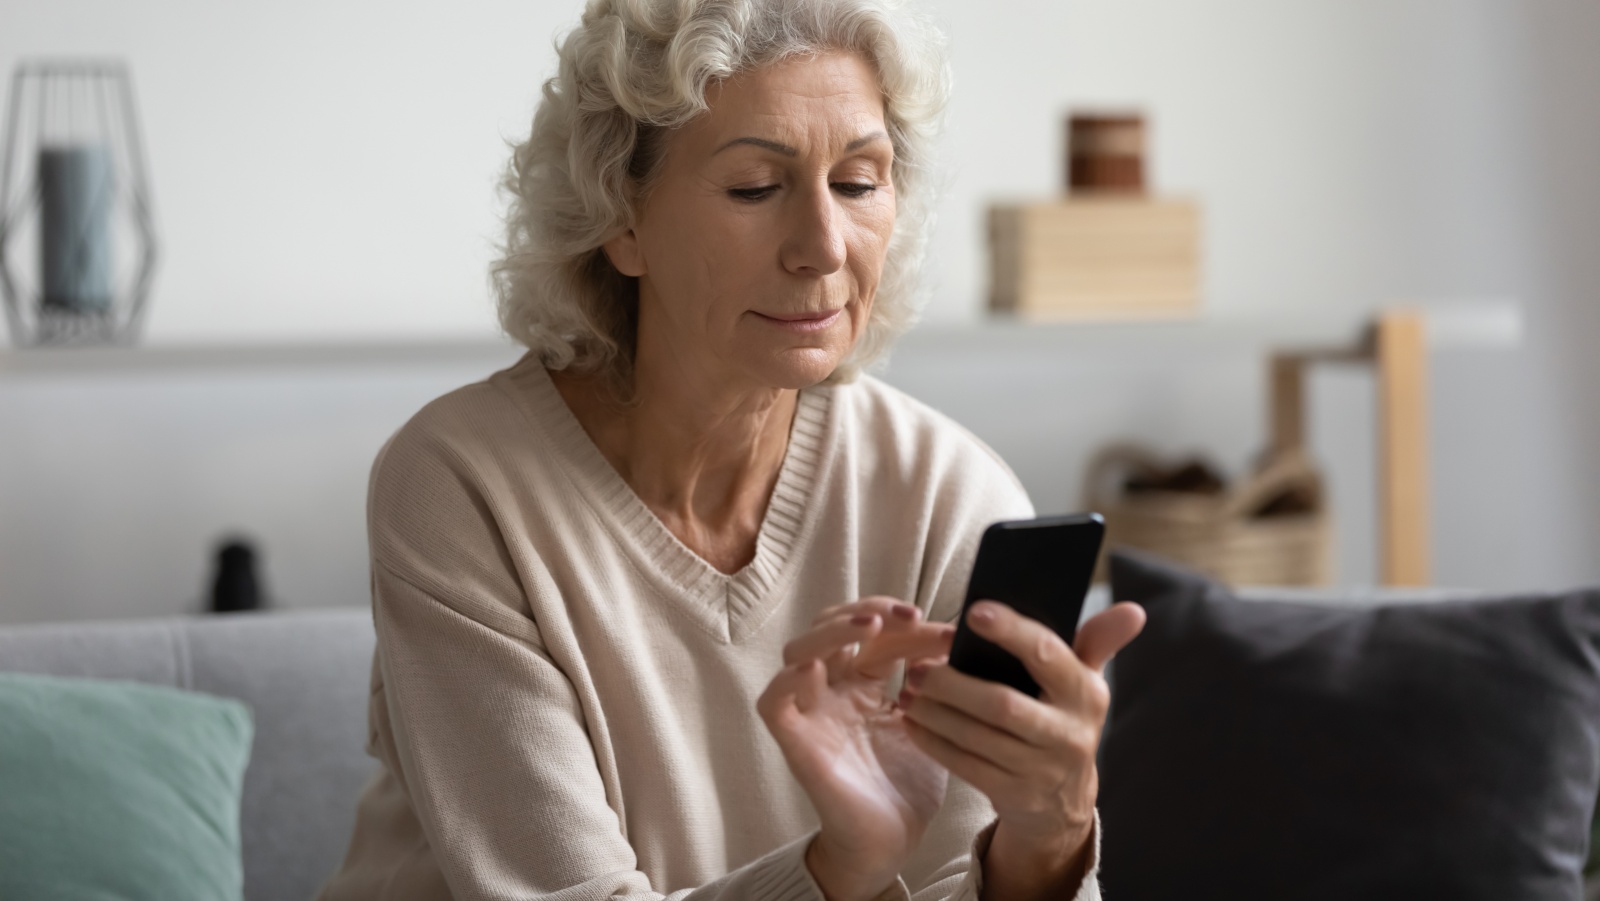 Older woman looks at smartphone.